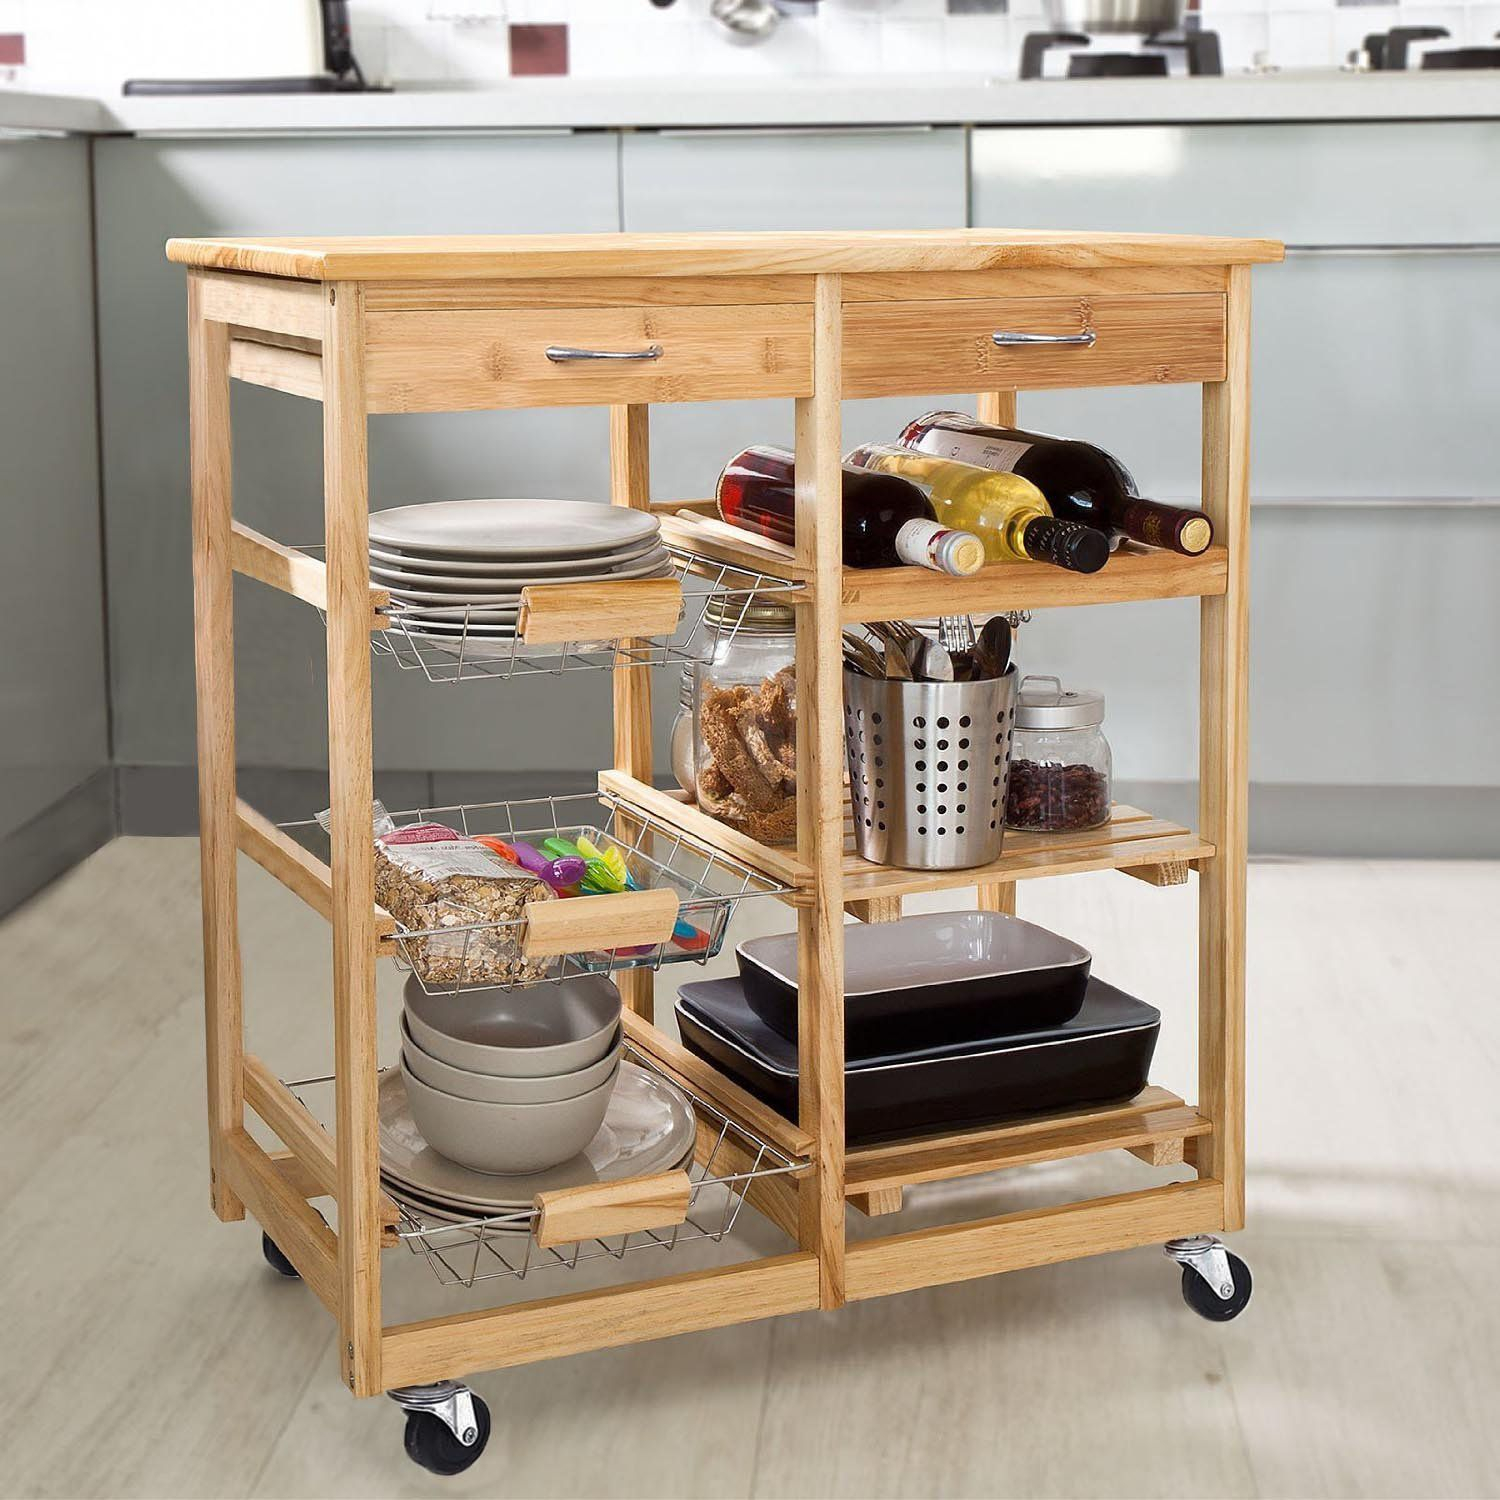 Origami Folding Kitchen Cart The 8 Best Kitchen Carts Of 2019